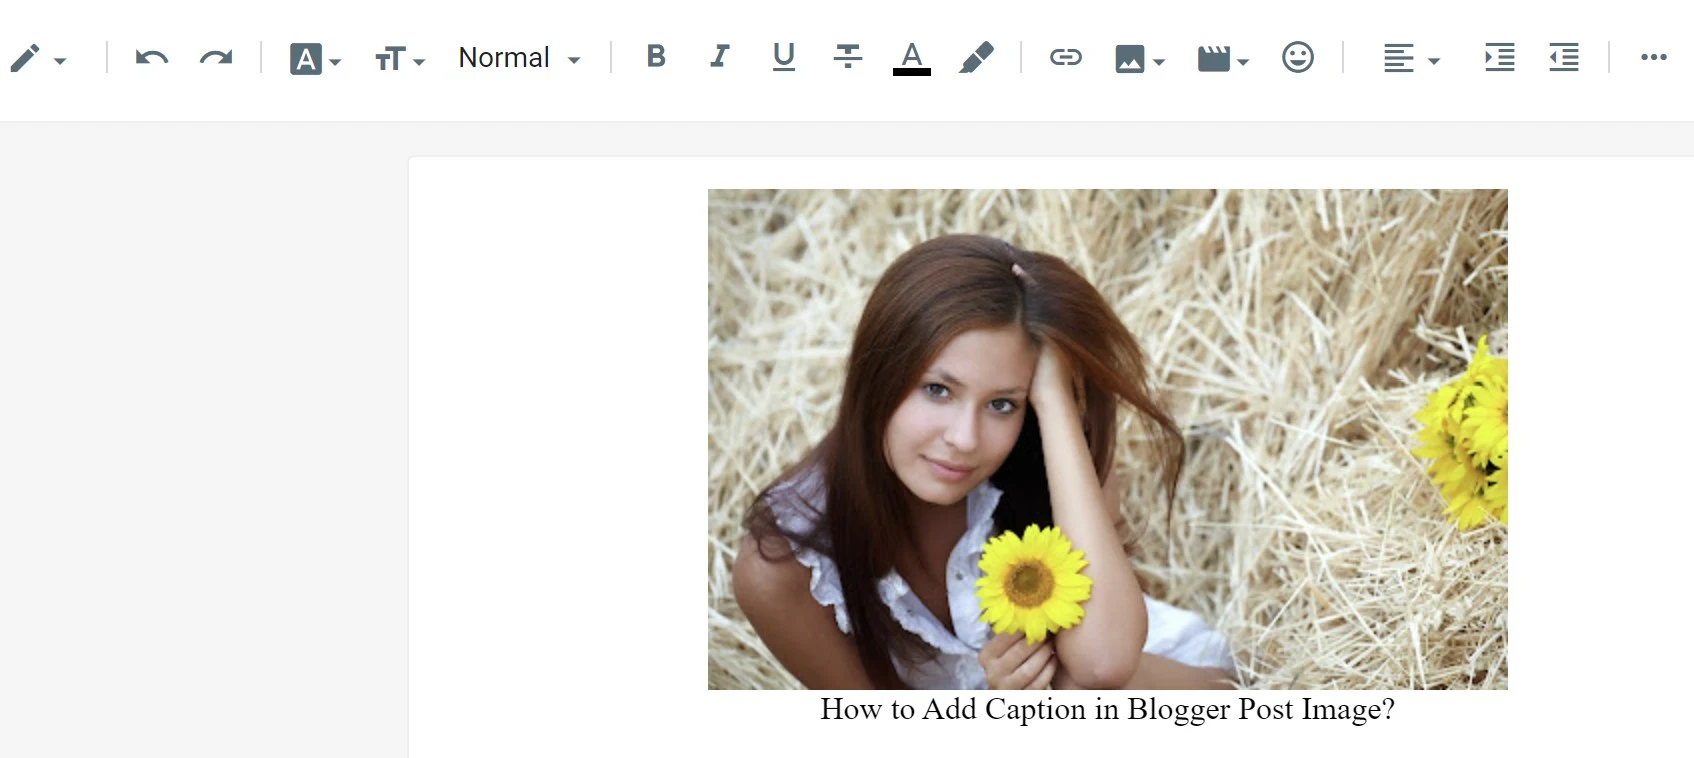 Adding captions to photos in the new Blogger